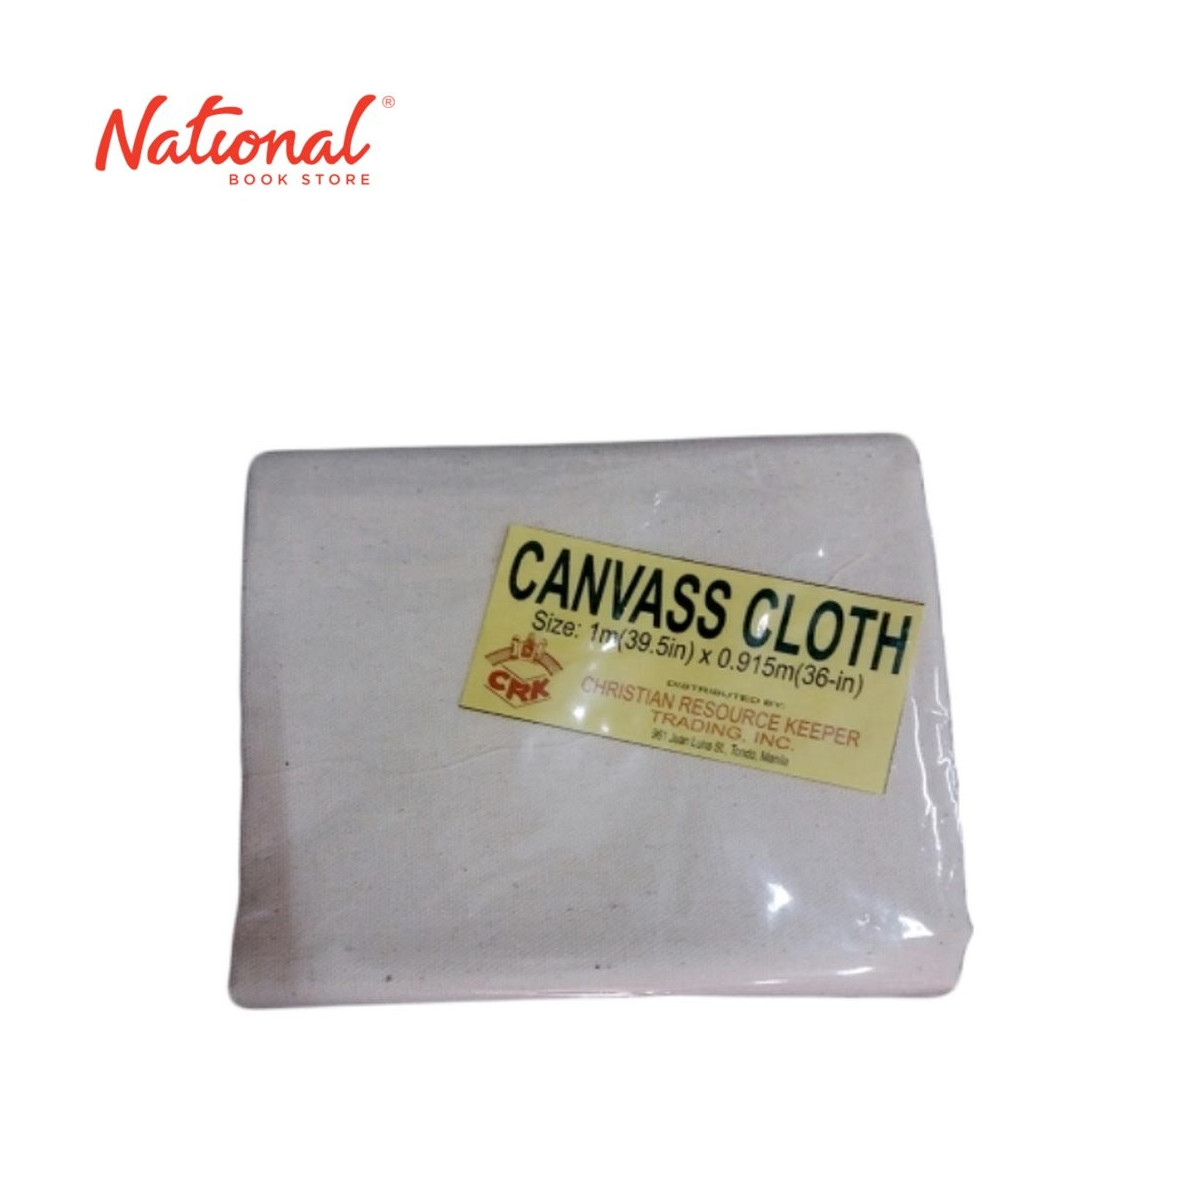 Canvas Cloth Cut Size 1 meter x 1 meter